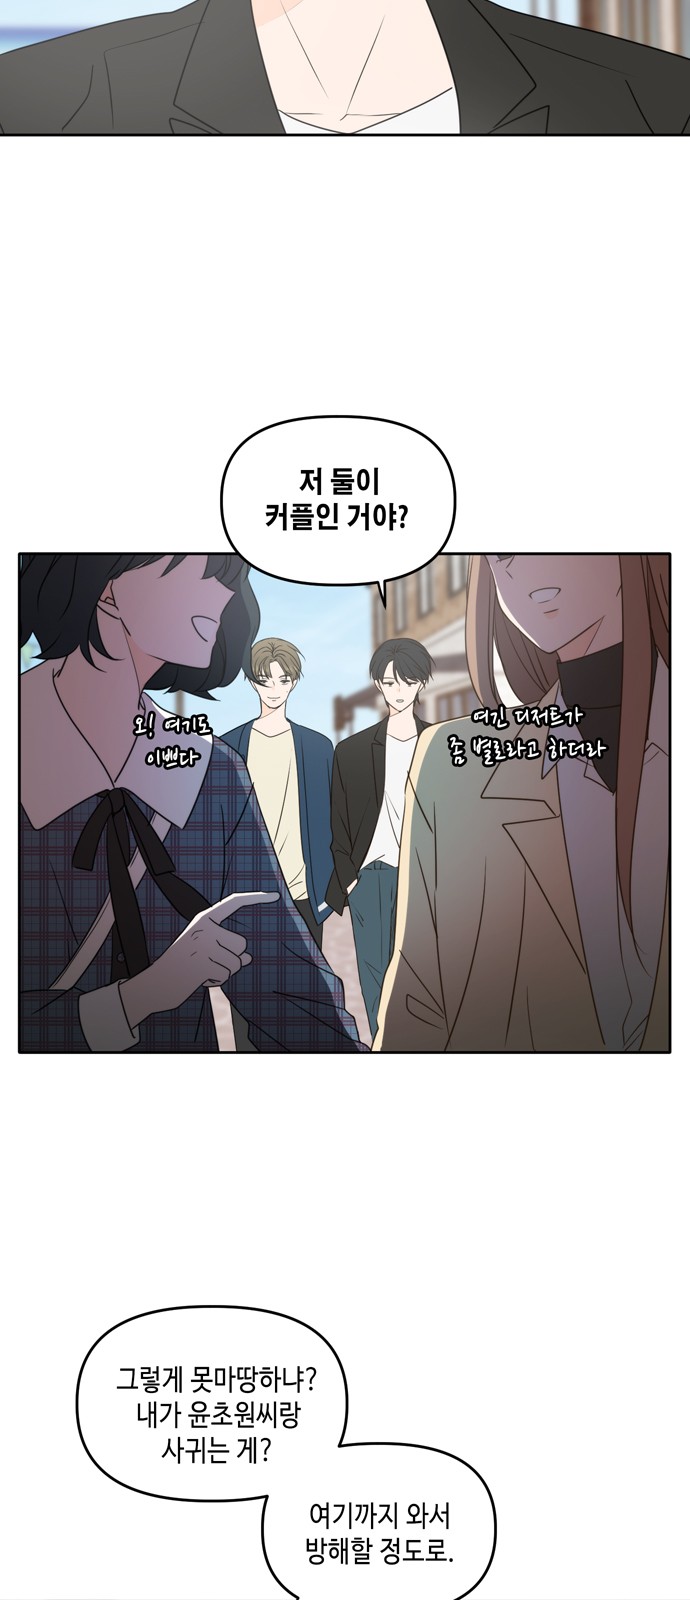 See You in My 19th Life - Chapter 88 - Page 3